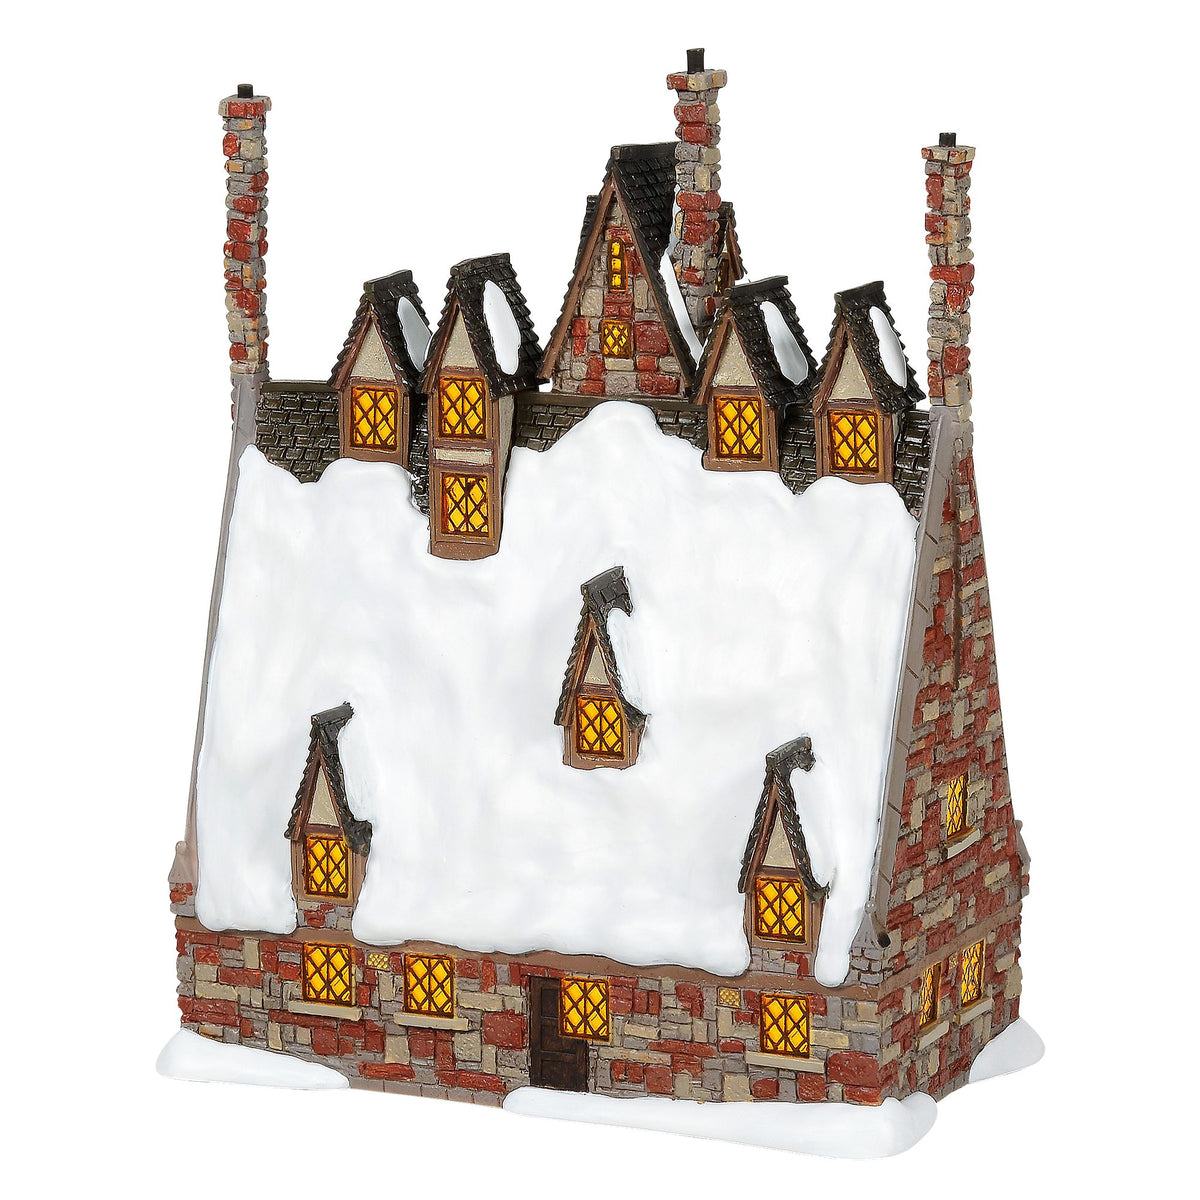  Department 56 Harry Potter Village Accessories Knight